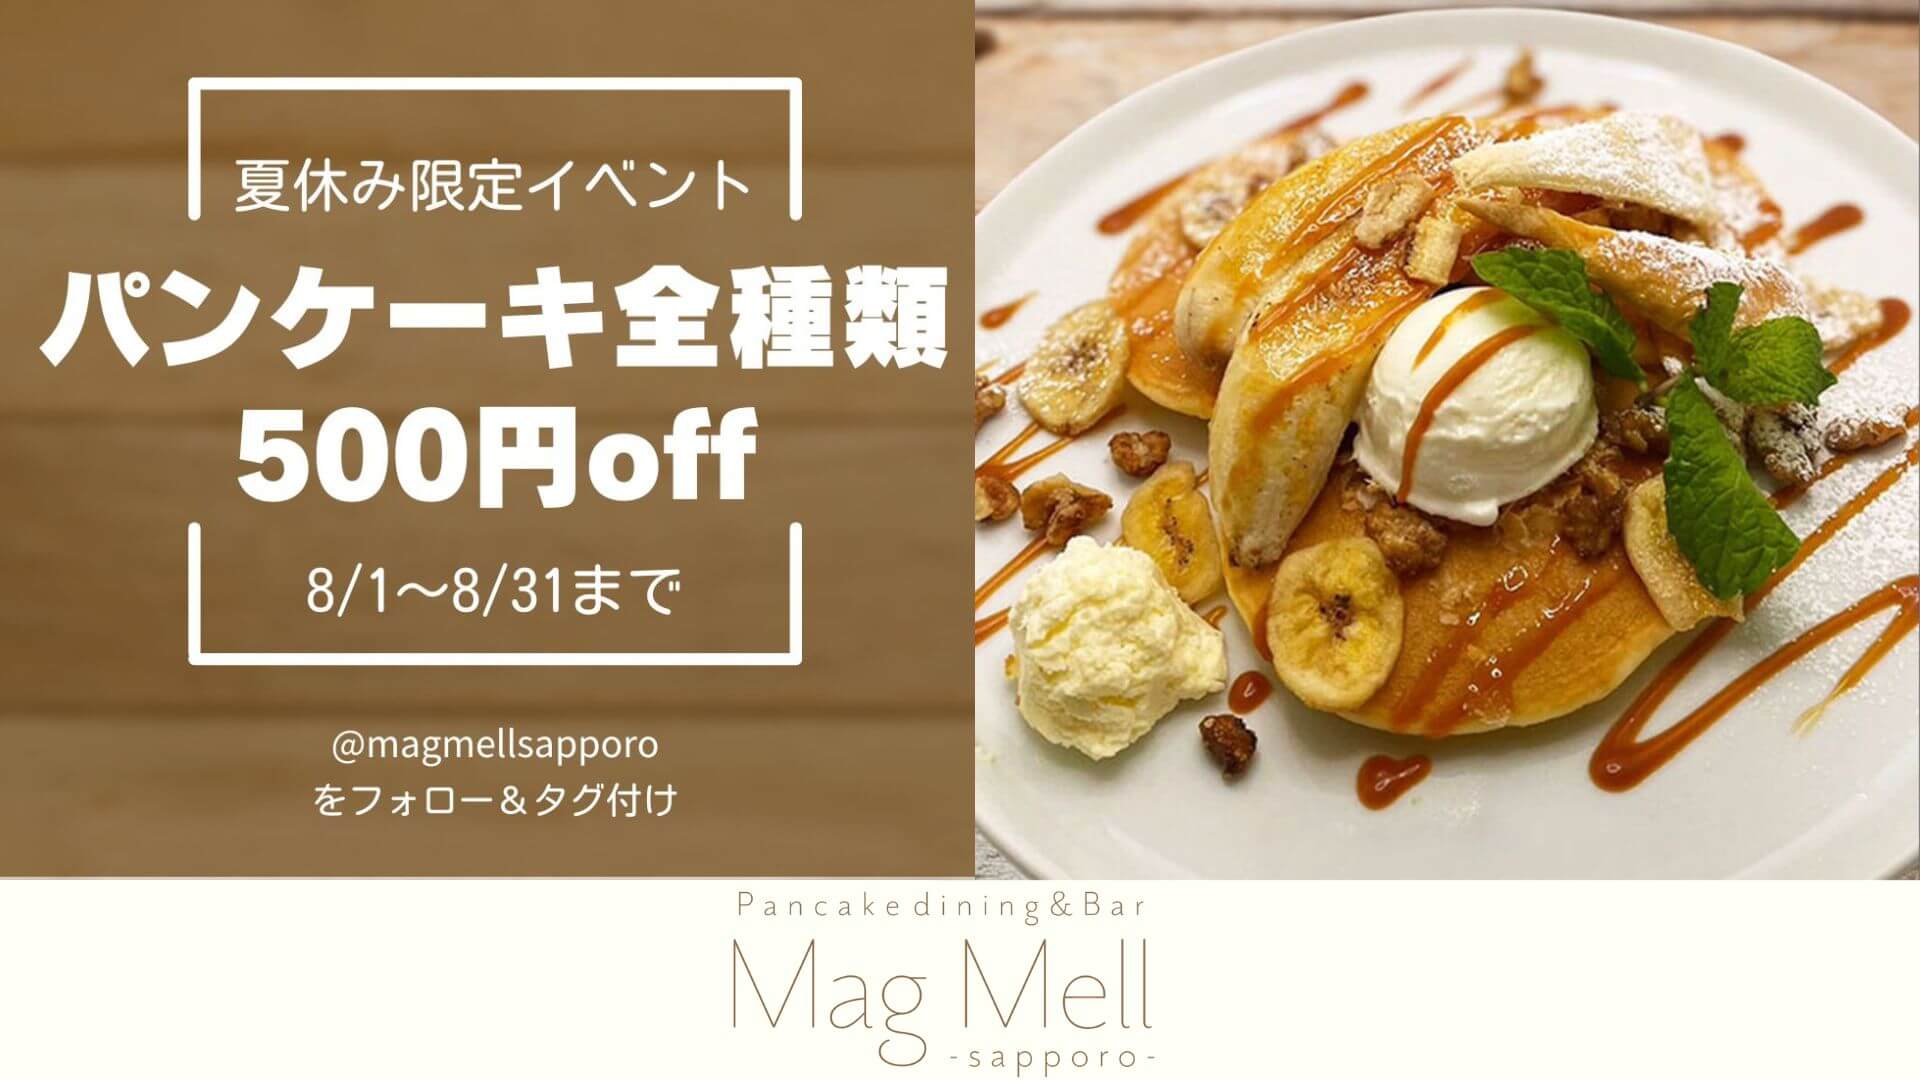 【MagMell Sapporo】夏休み限定イベント【パンケーキ500円off】開催！